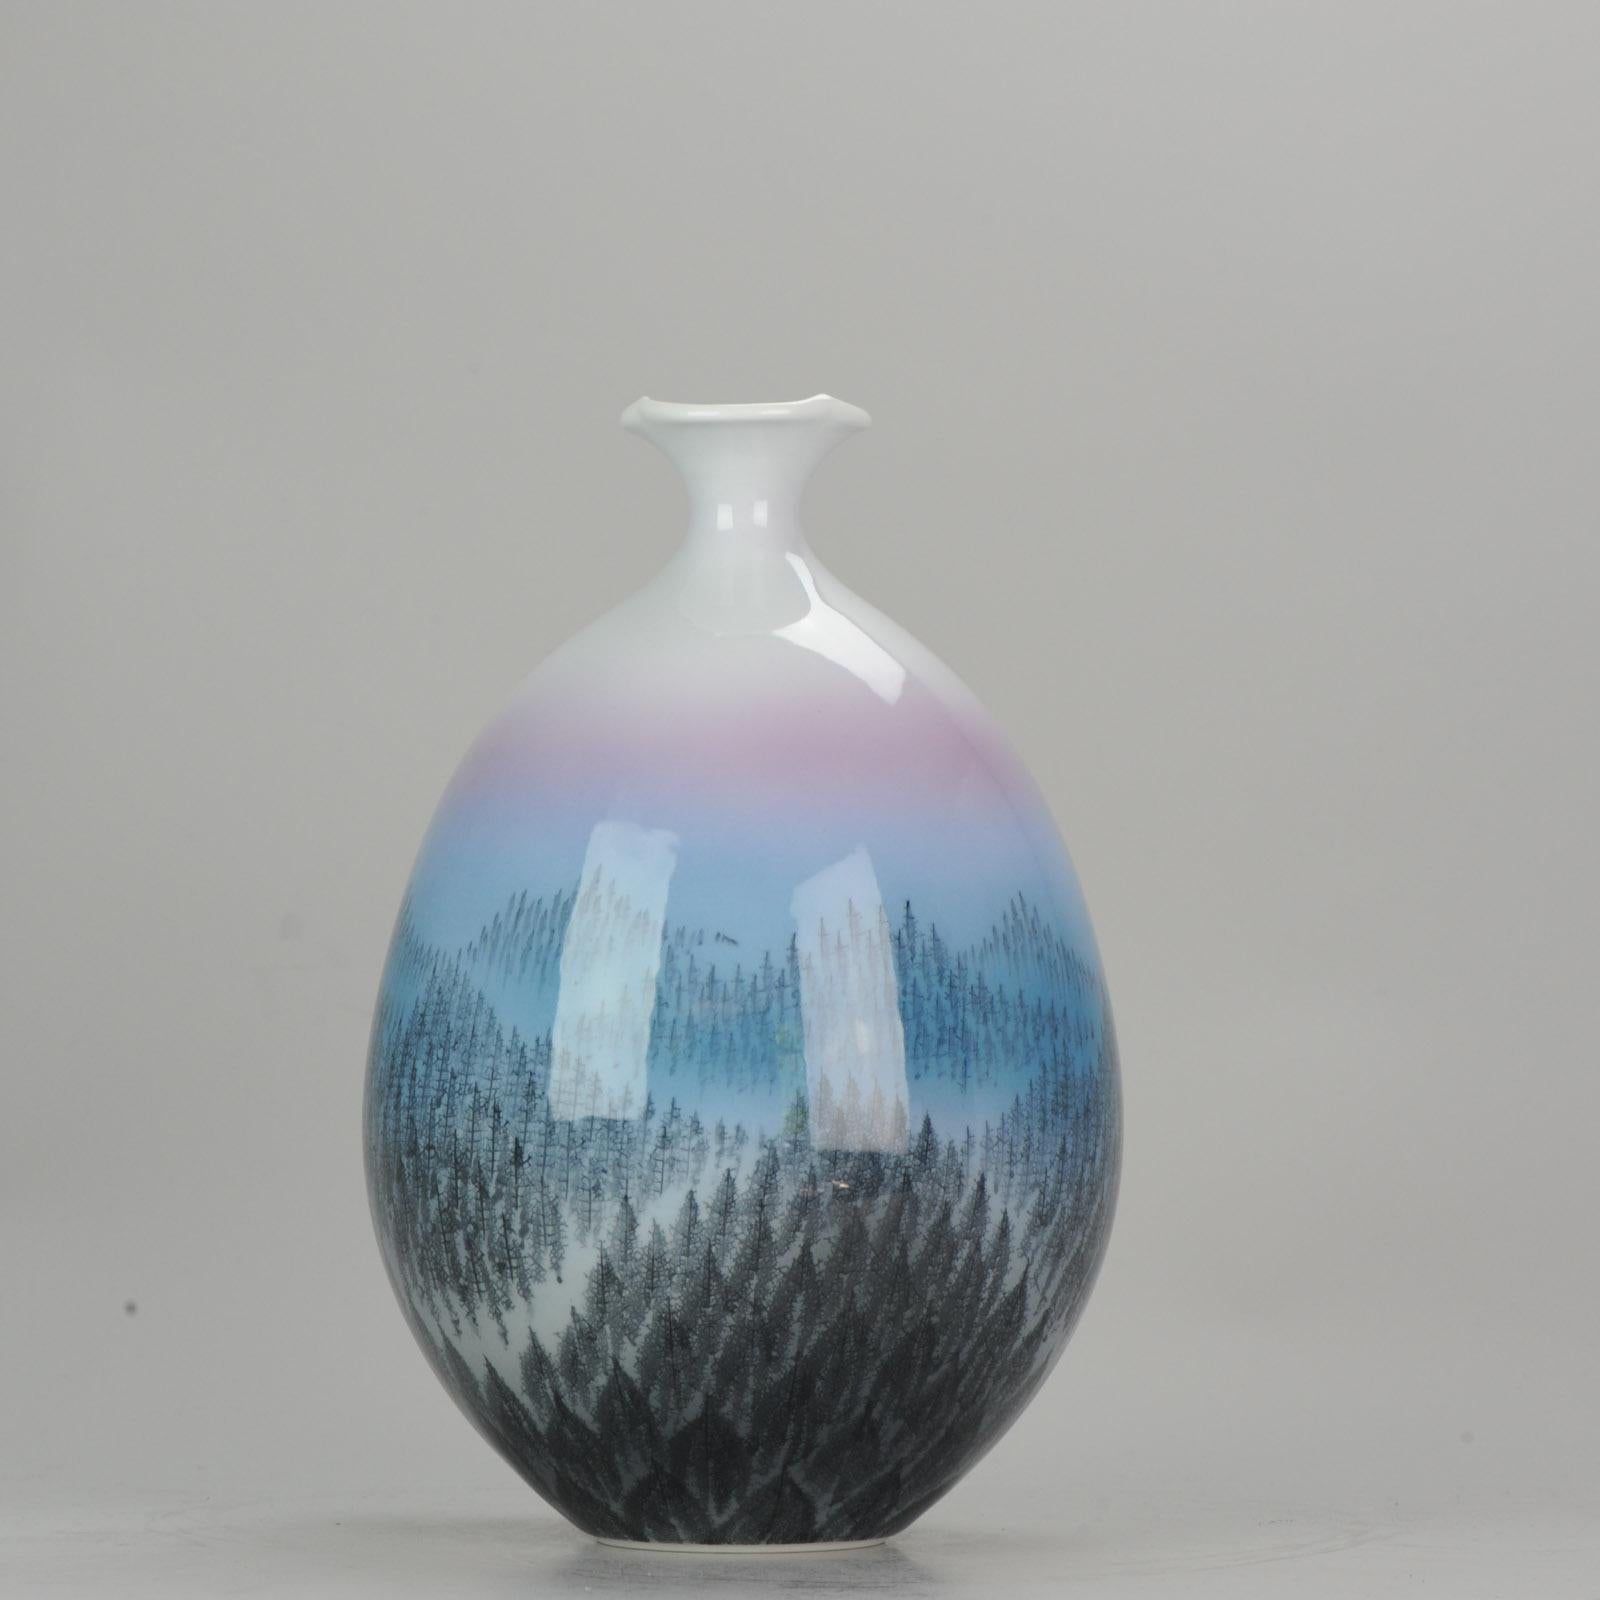 A blue and white porcelain vase, with a winter landscape at sunrise

 Condition
Overall condition perfect. Size: 170 x 170 x 260mm

Period
20th century.